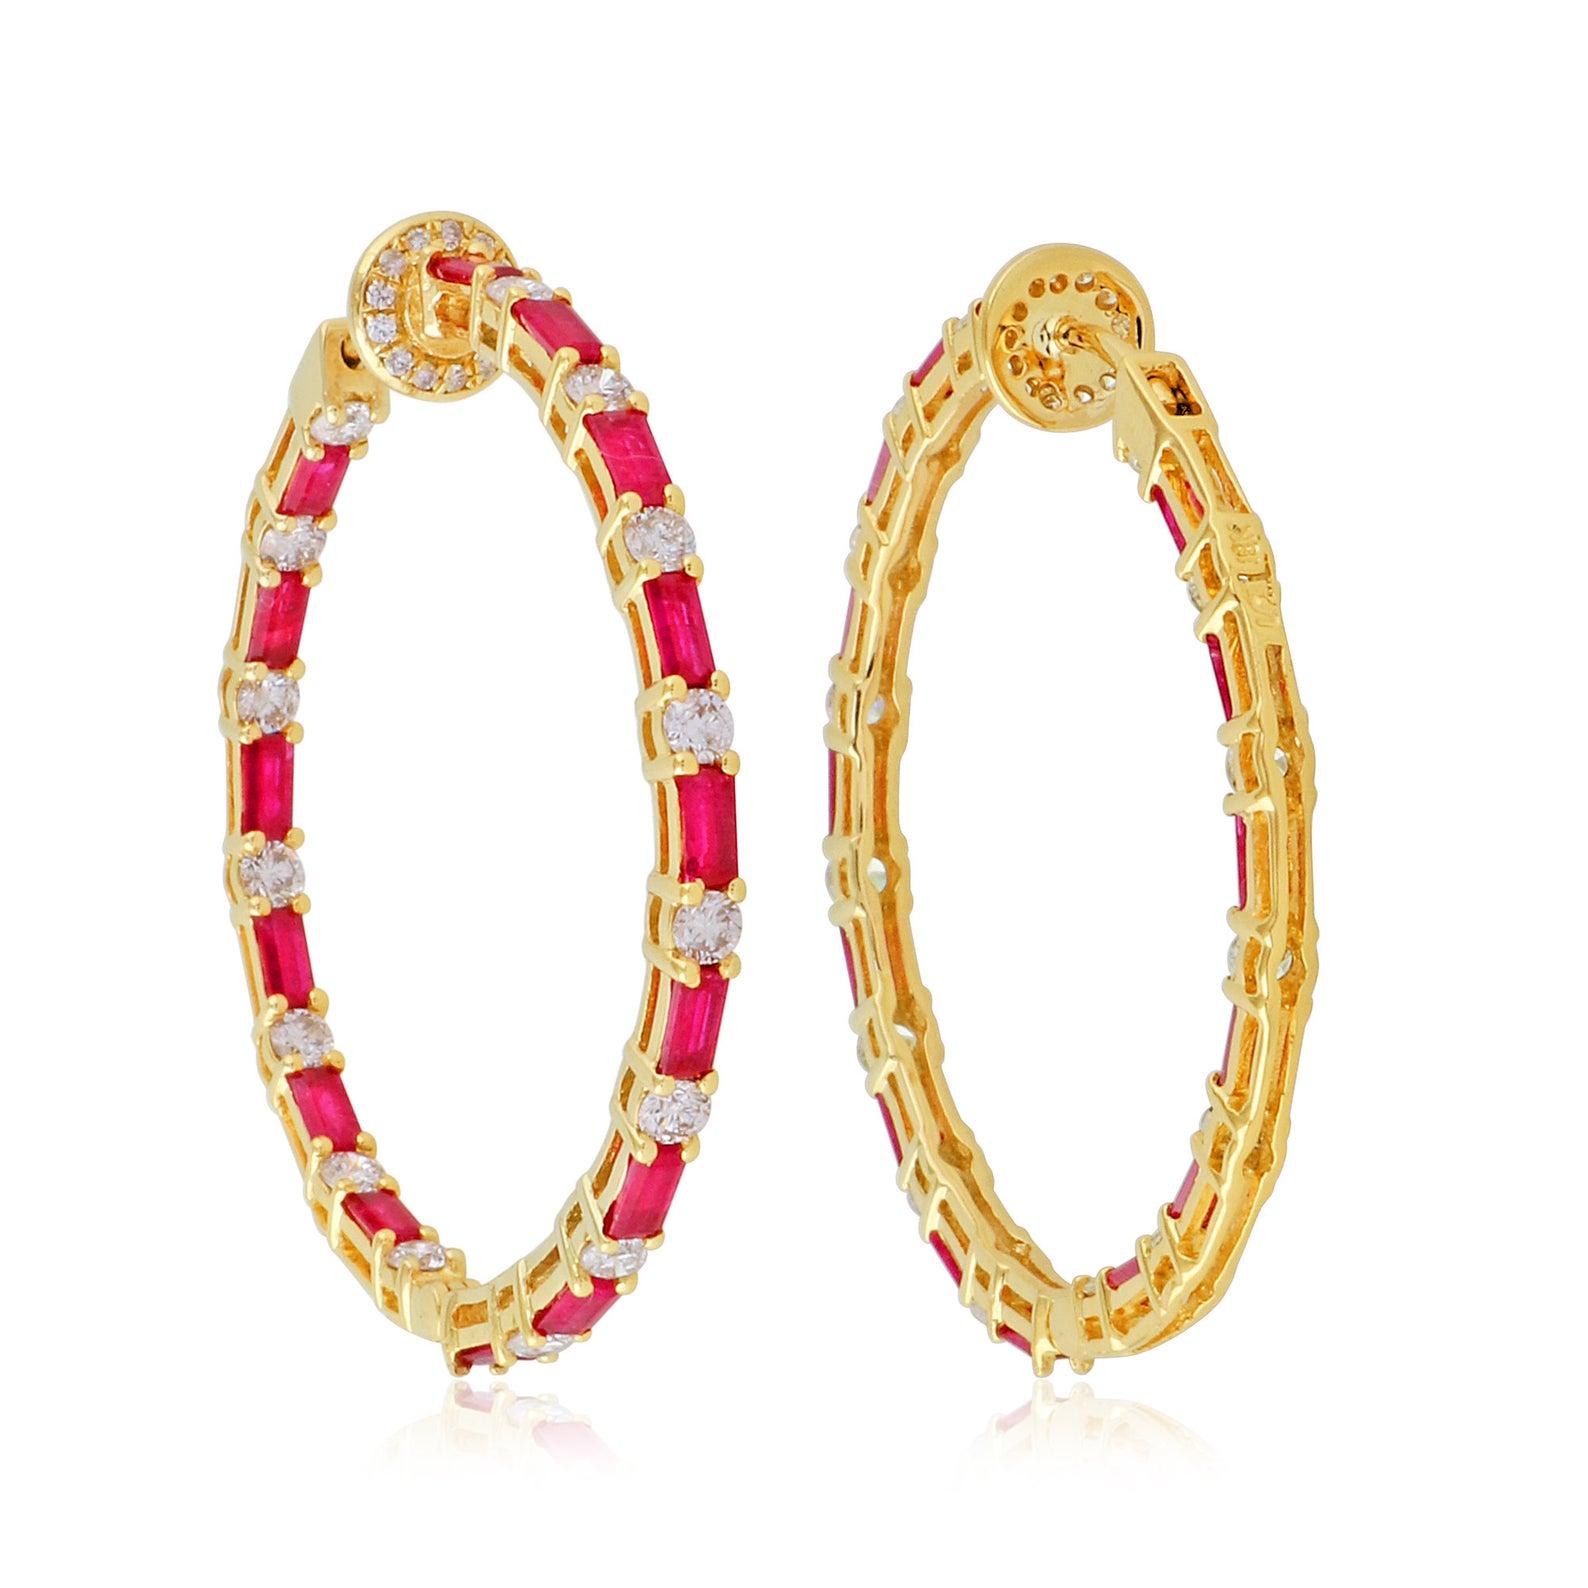 Cast in 14-karat gold, these beautiful inside out hoop earrings are hand set with 3.63 carats of baguette ruby and 1.85 carats of sparkling diamonds. 

FOLLOW  MEGHNA JEWELS storefront to view the latest collection & exclusive pieces.  Meghna Jewels